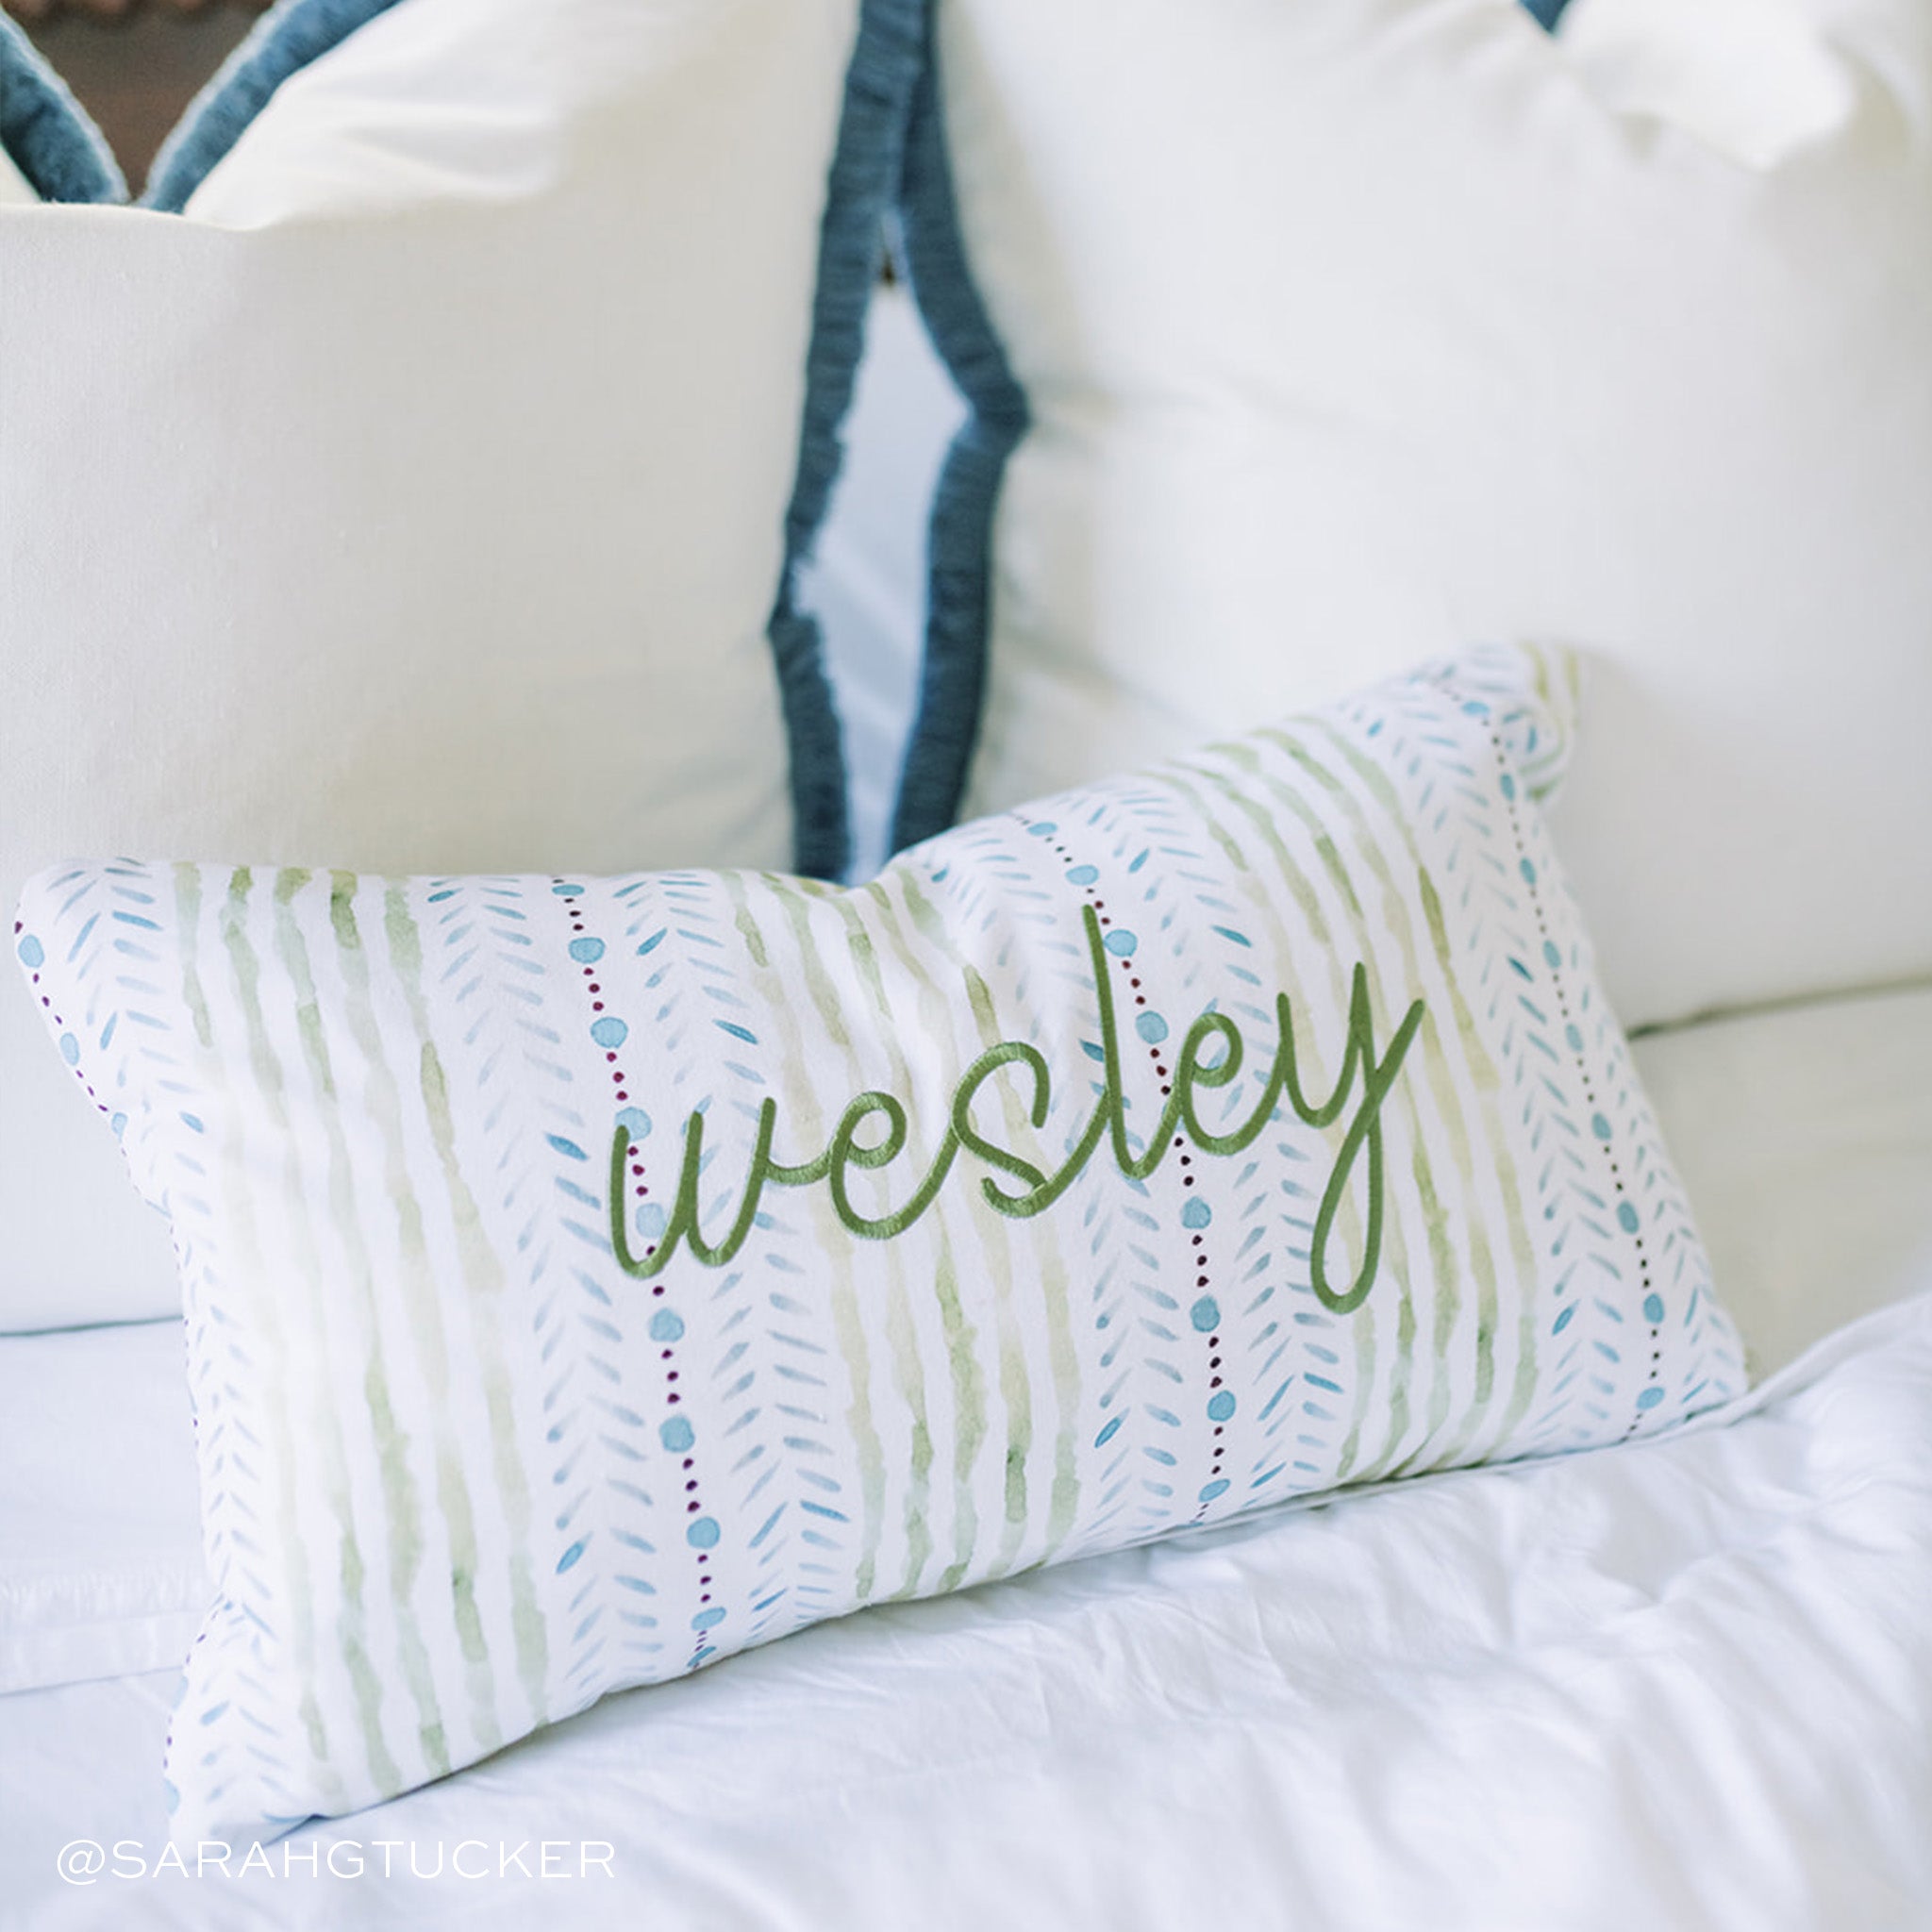 Close-up of Blue & Green Striped Printed Monogrammed Lumbar over two Linen Oat Pillows. Photo taken by Sarah G Tucker